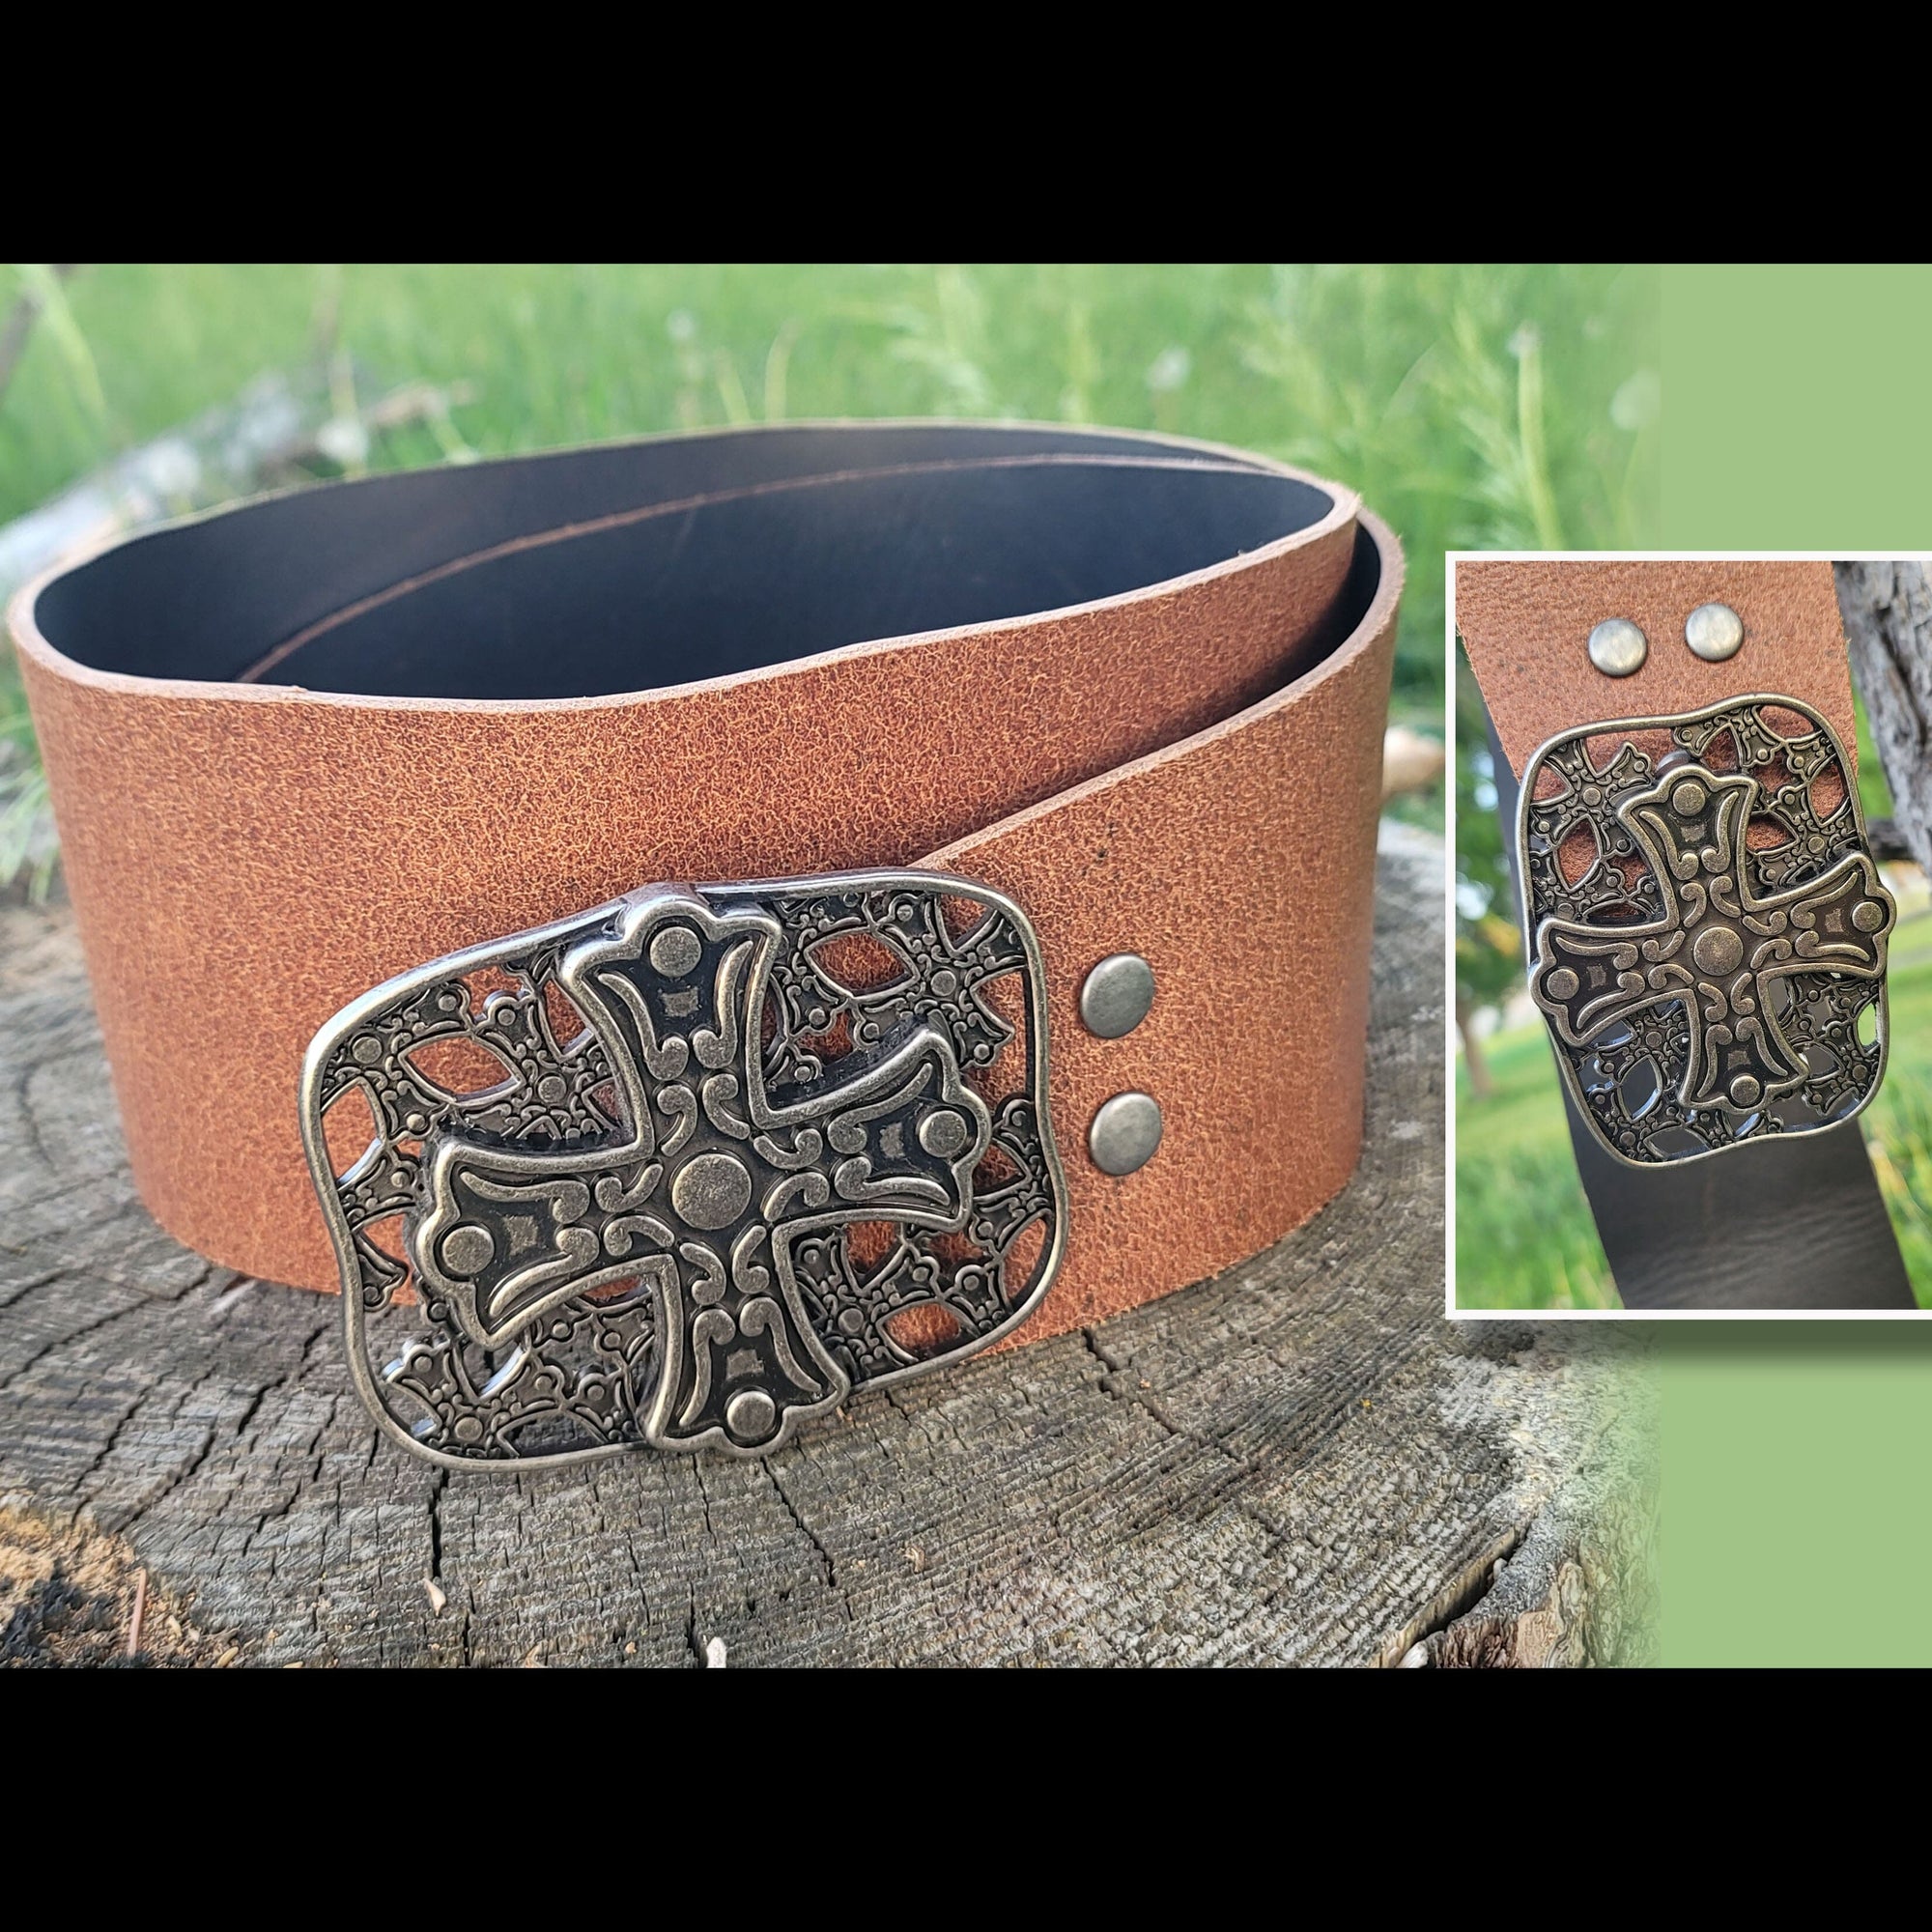 Brown Leather Belt with Cross Buckle - BJO11